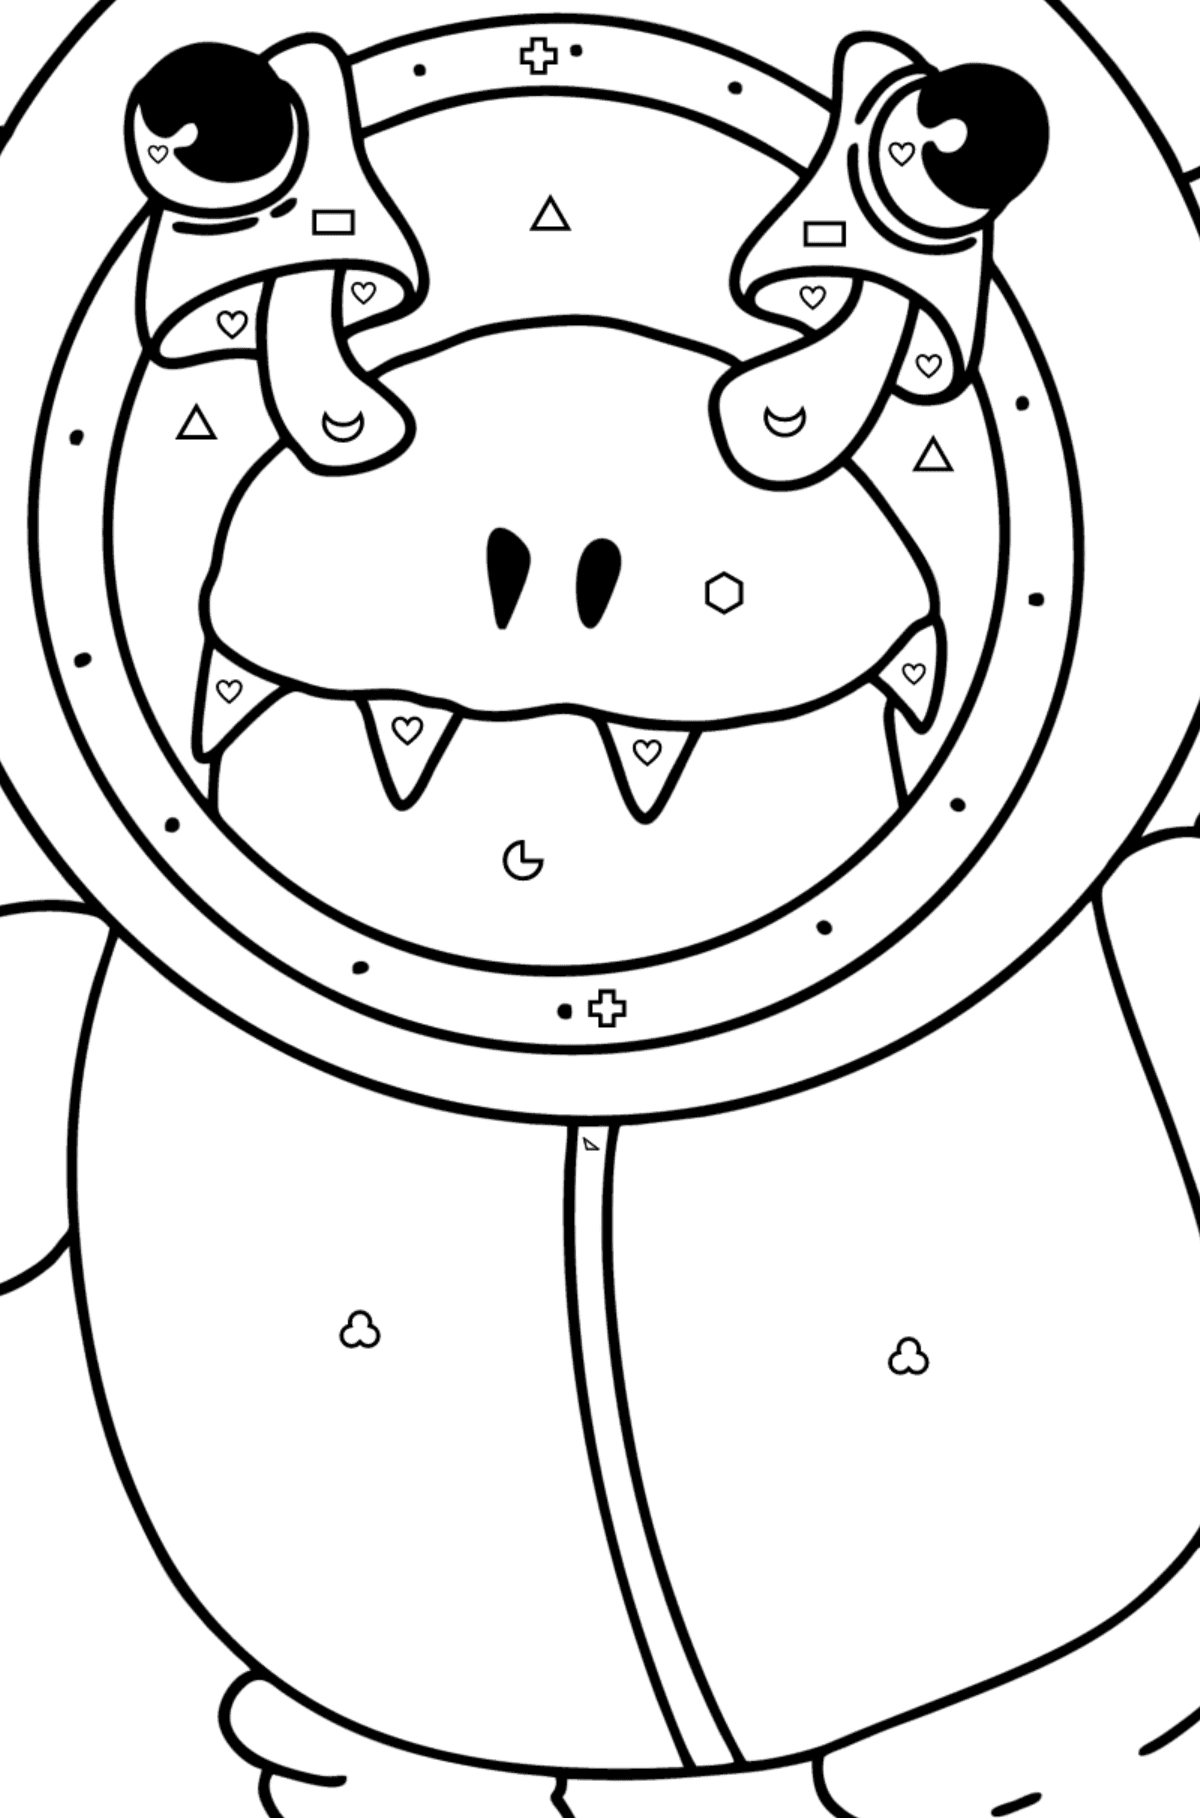 Coloring page alien in spacesuit - Coloring by Geometric Shapes for Kids